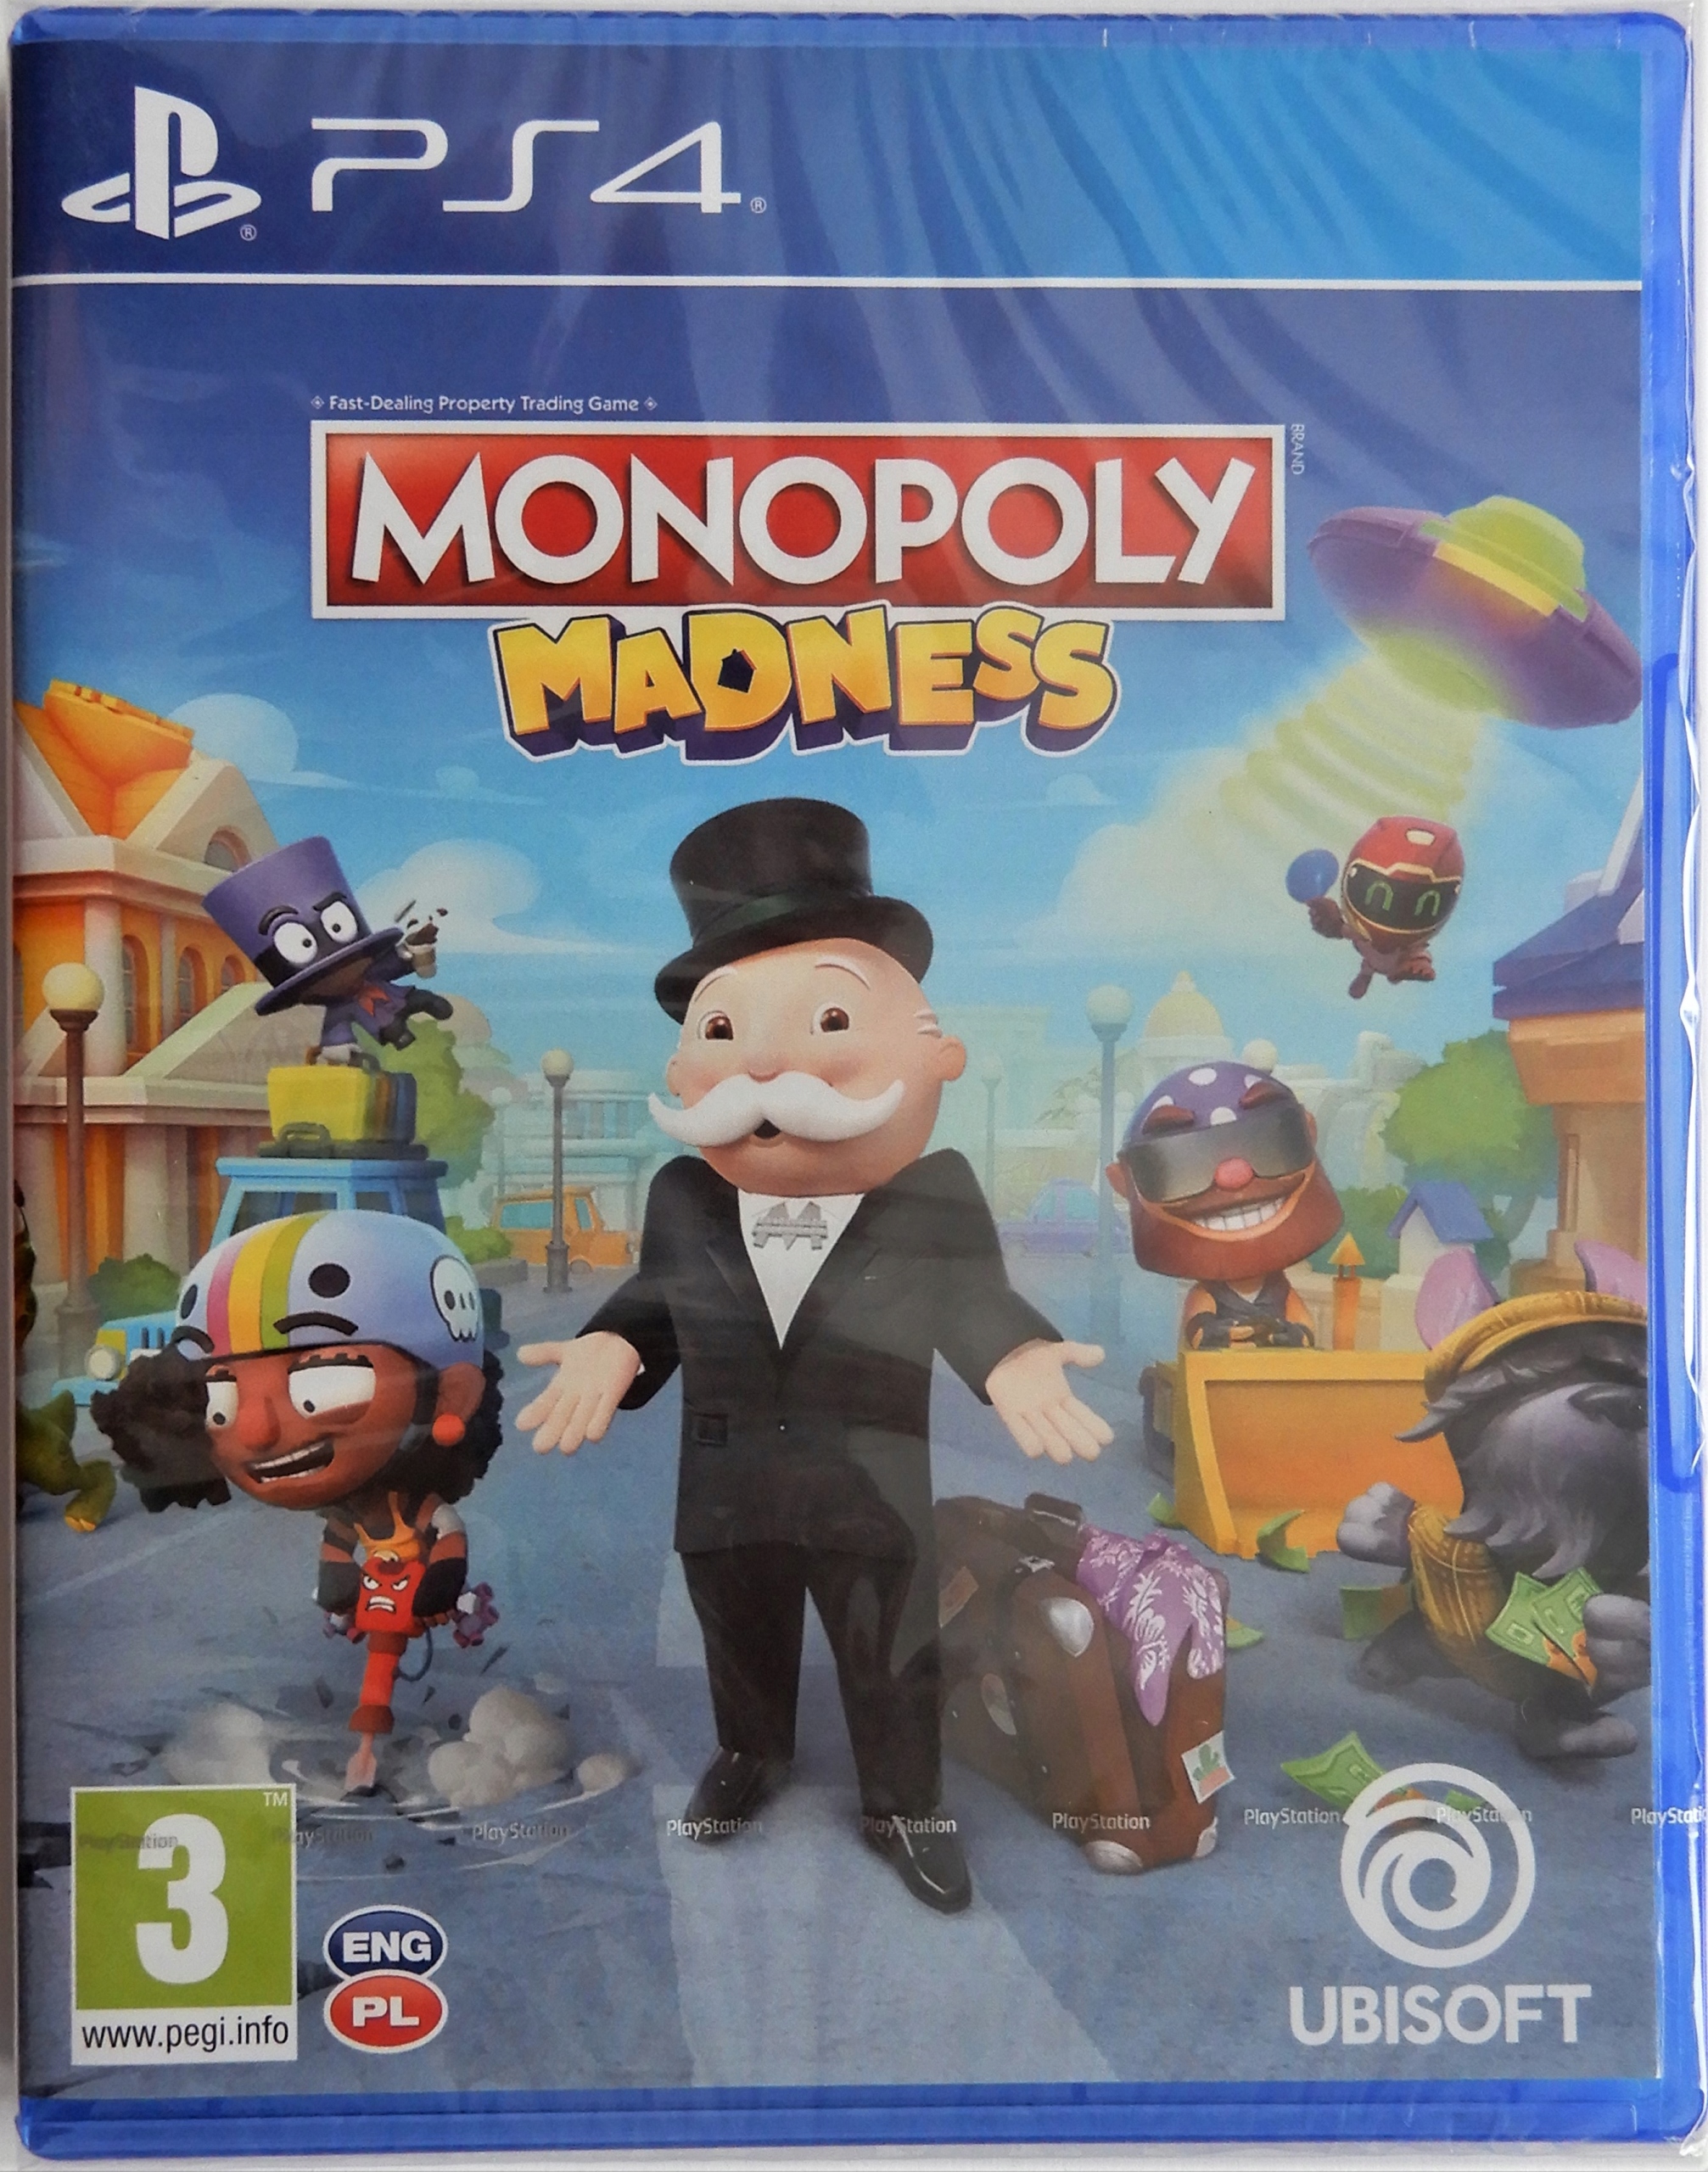 Monopoly madness steam фото 37